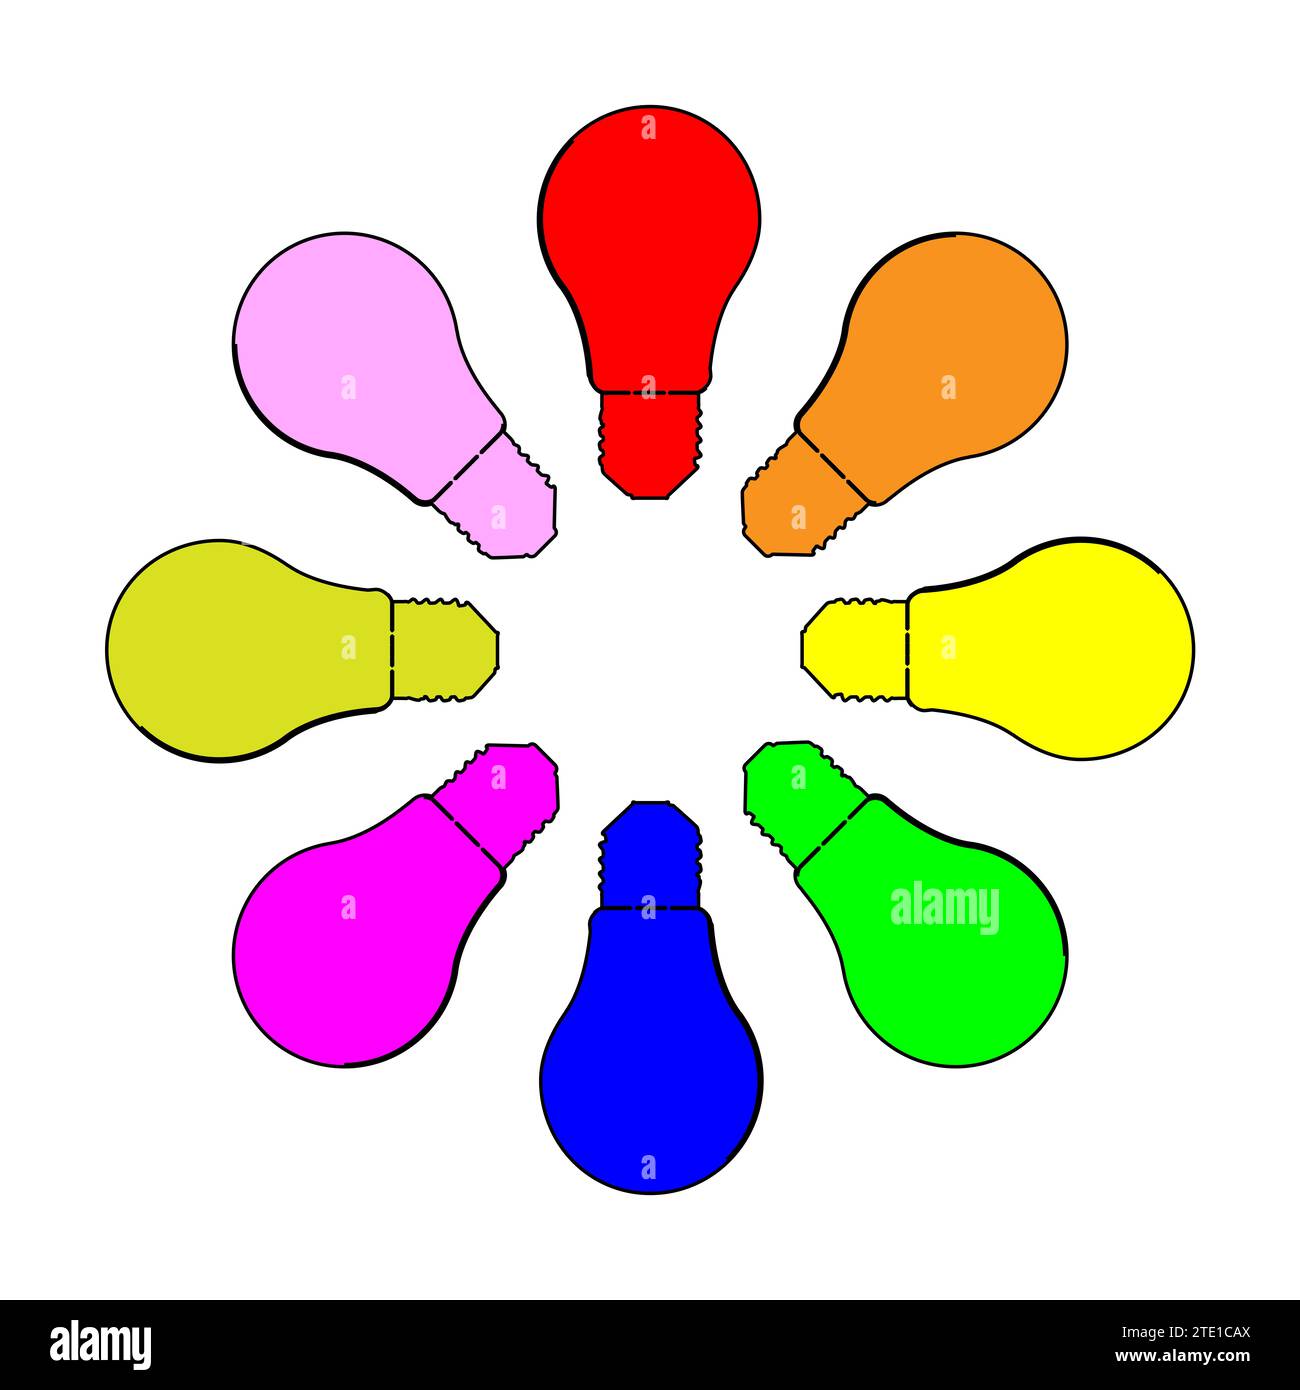 Multi colored cartoon light bulb shapes all set over a white background Stock Photo